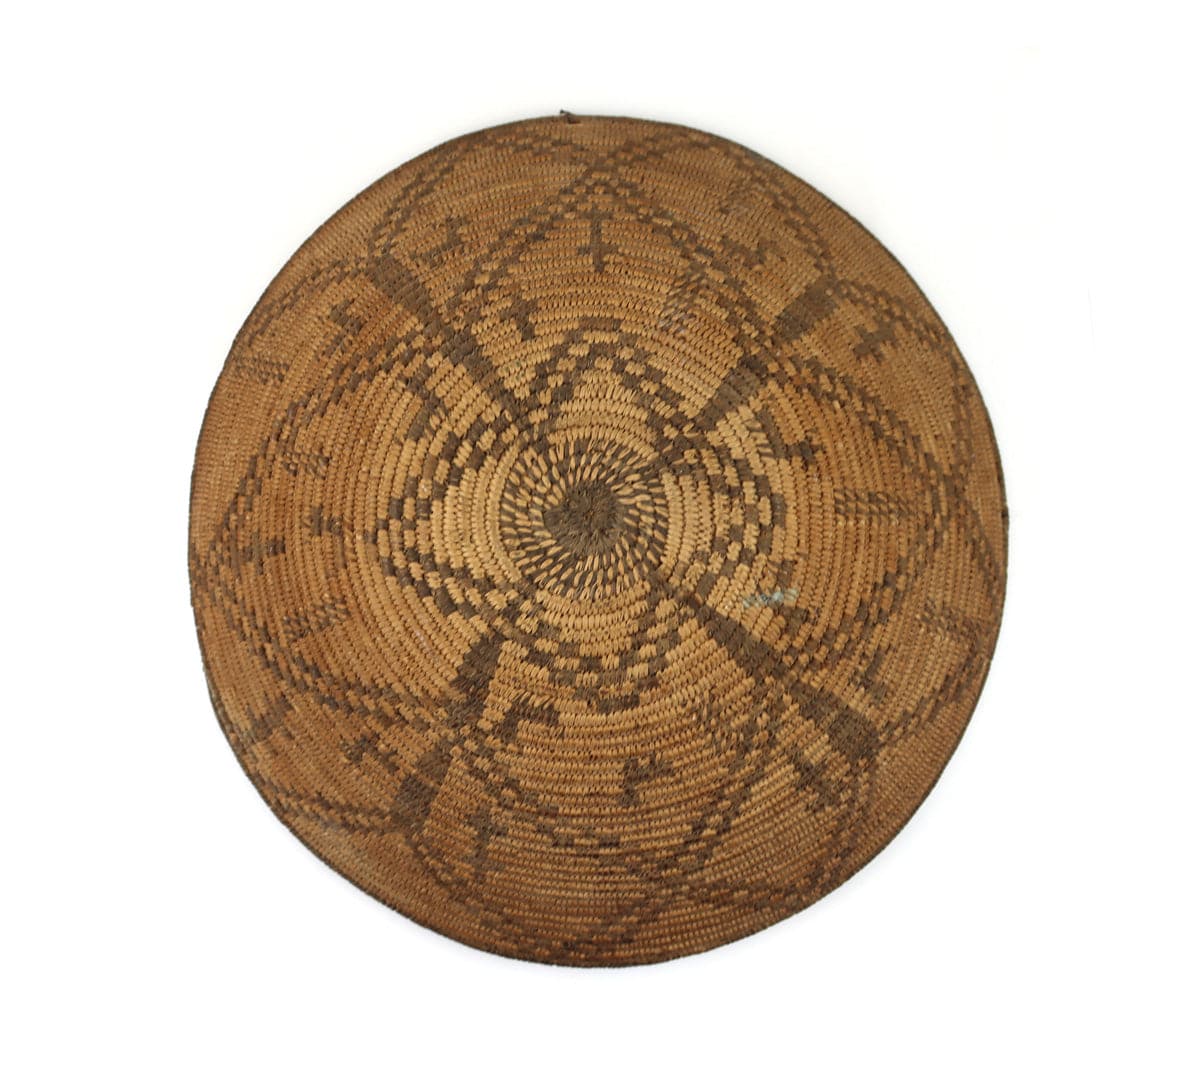 Apache Basket with Geometic Design and Animal Pictorials c. 1890s, 3" x 11.75" (SK3229) 6